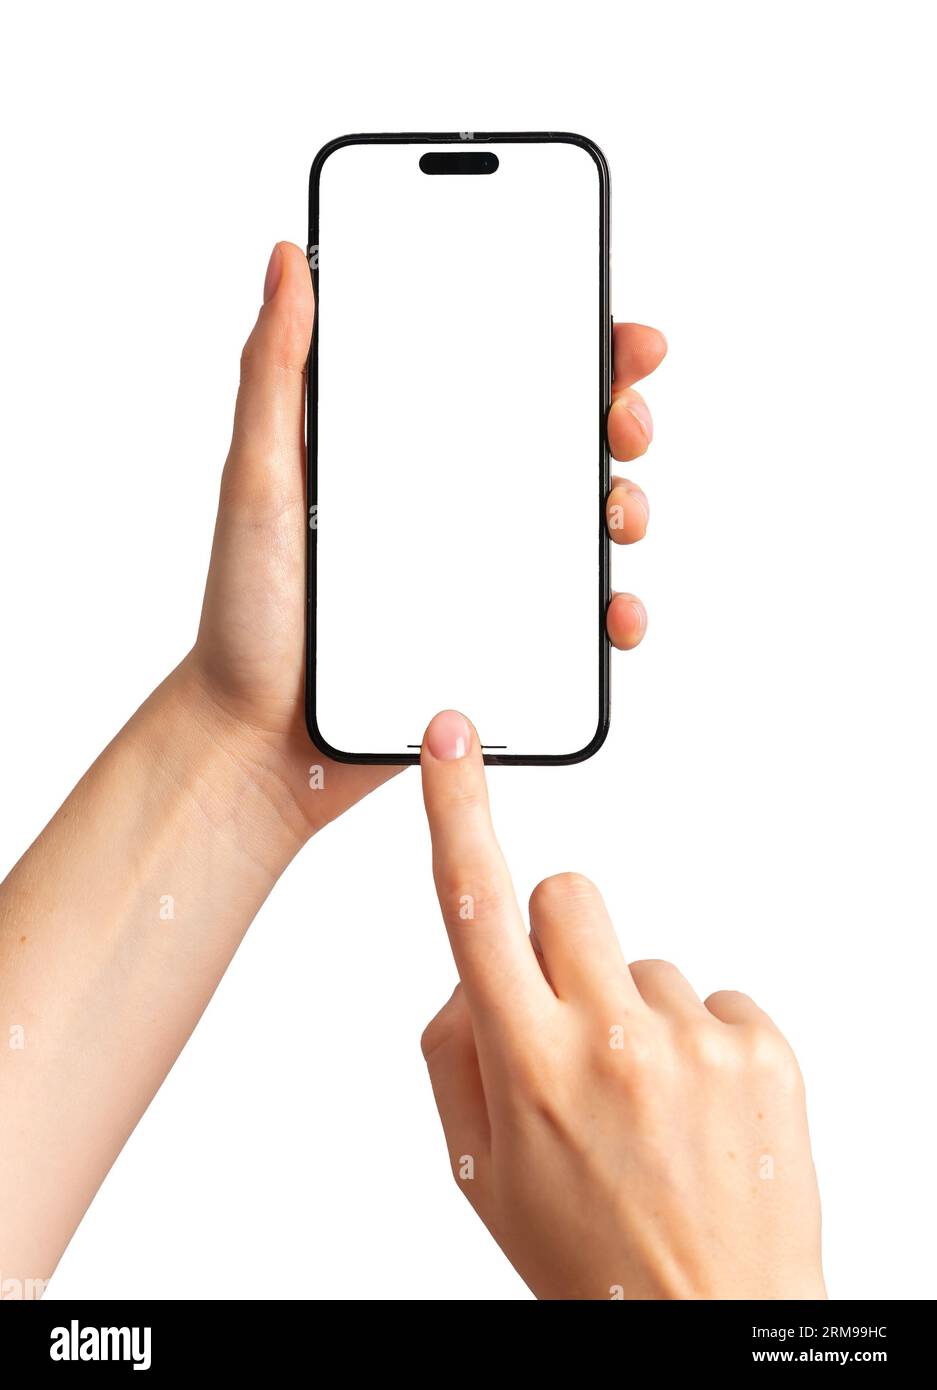 Finger clicking tapping on blank phone screen, smartphone mock up, isolated on white background. Stock Photo